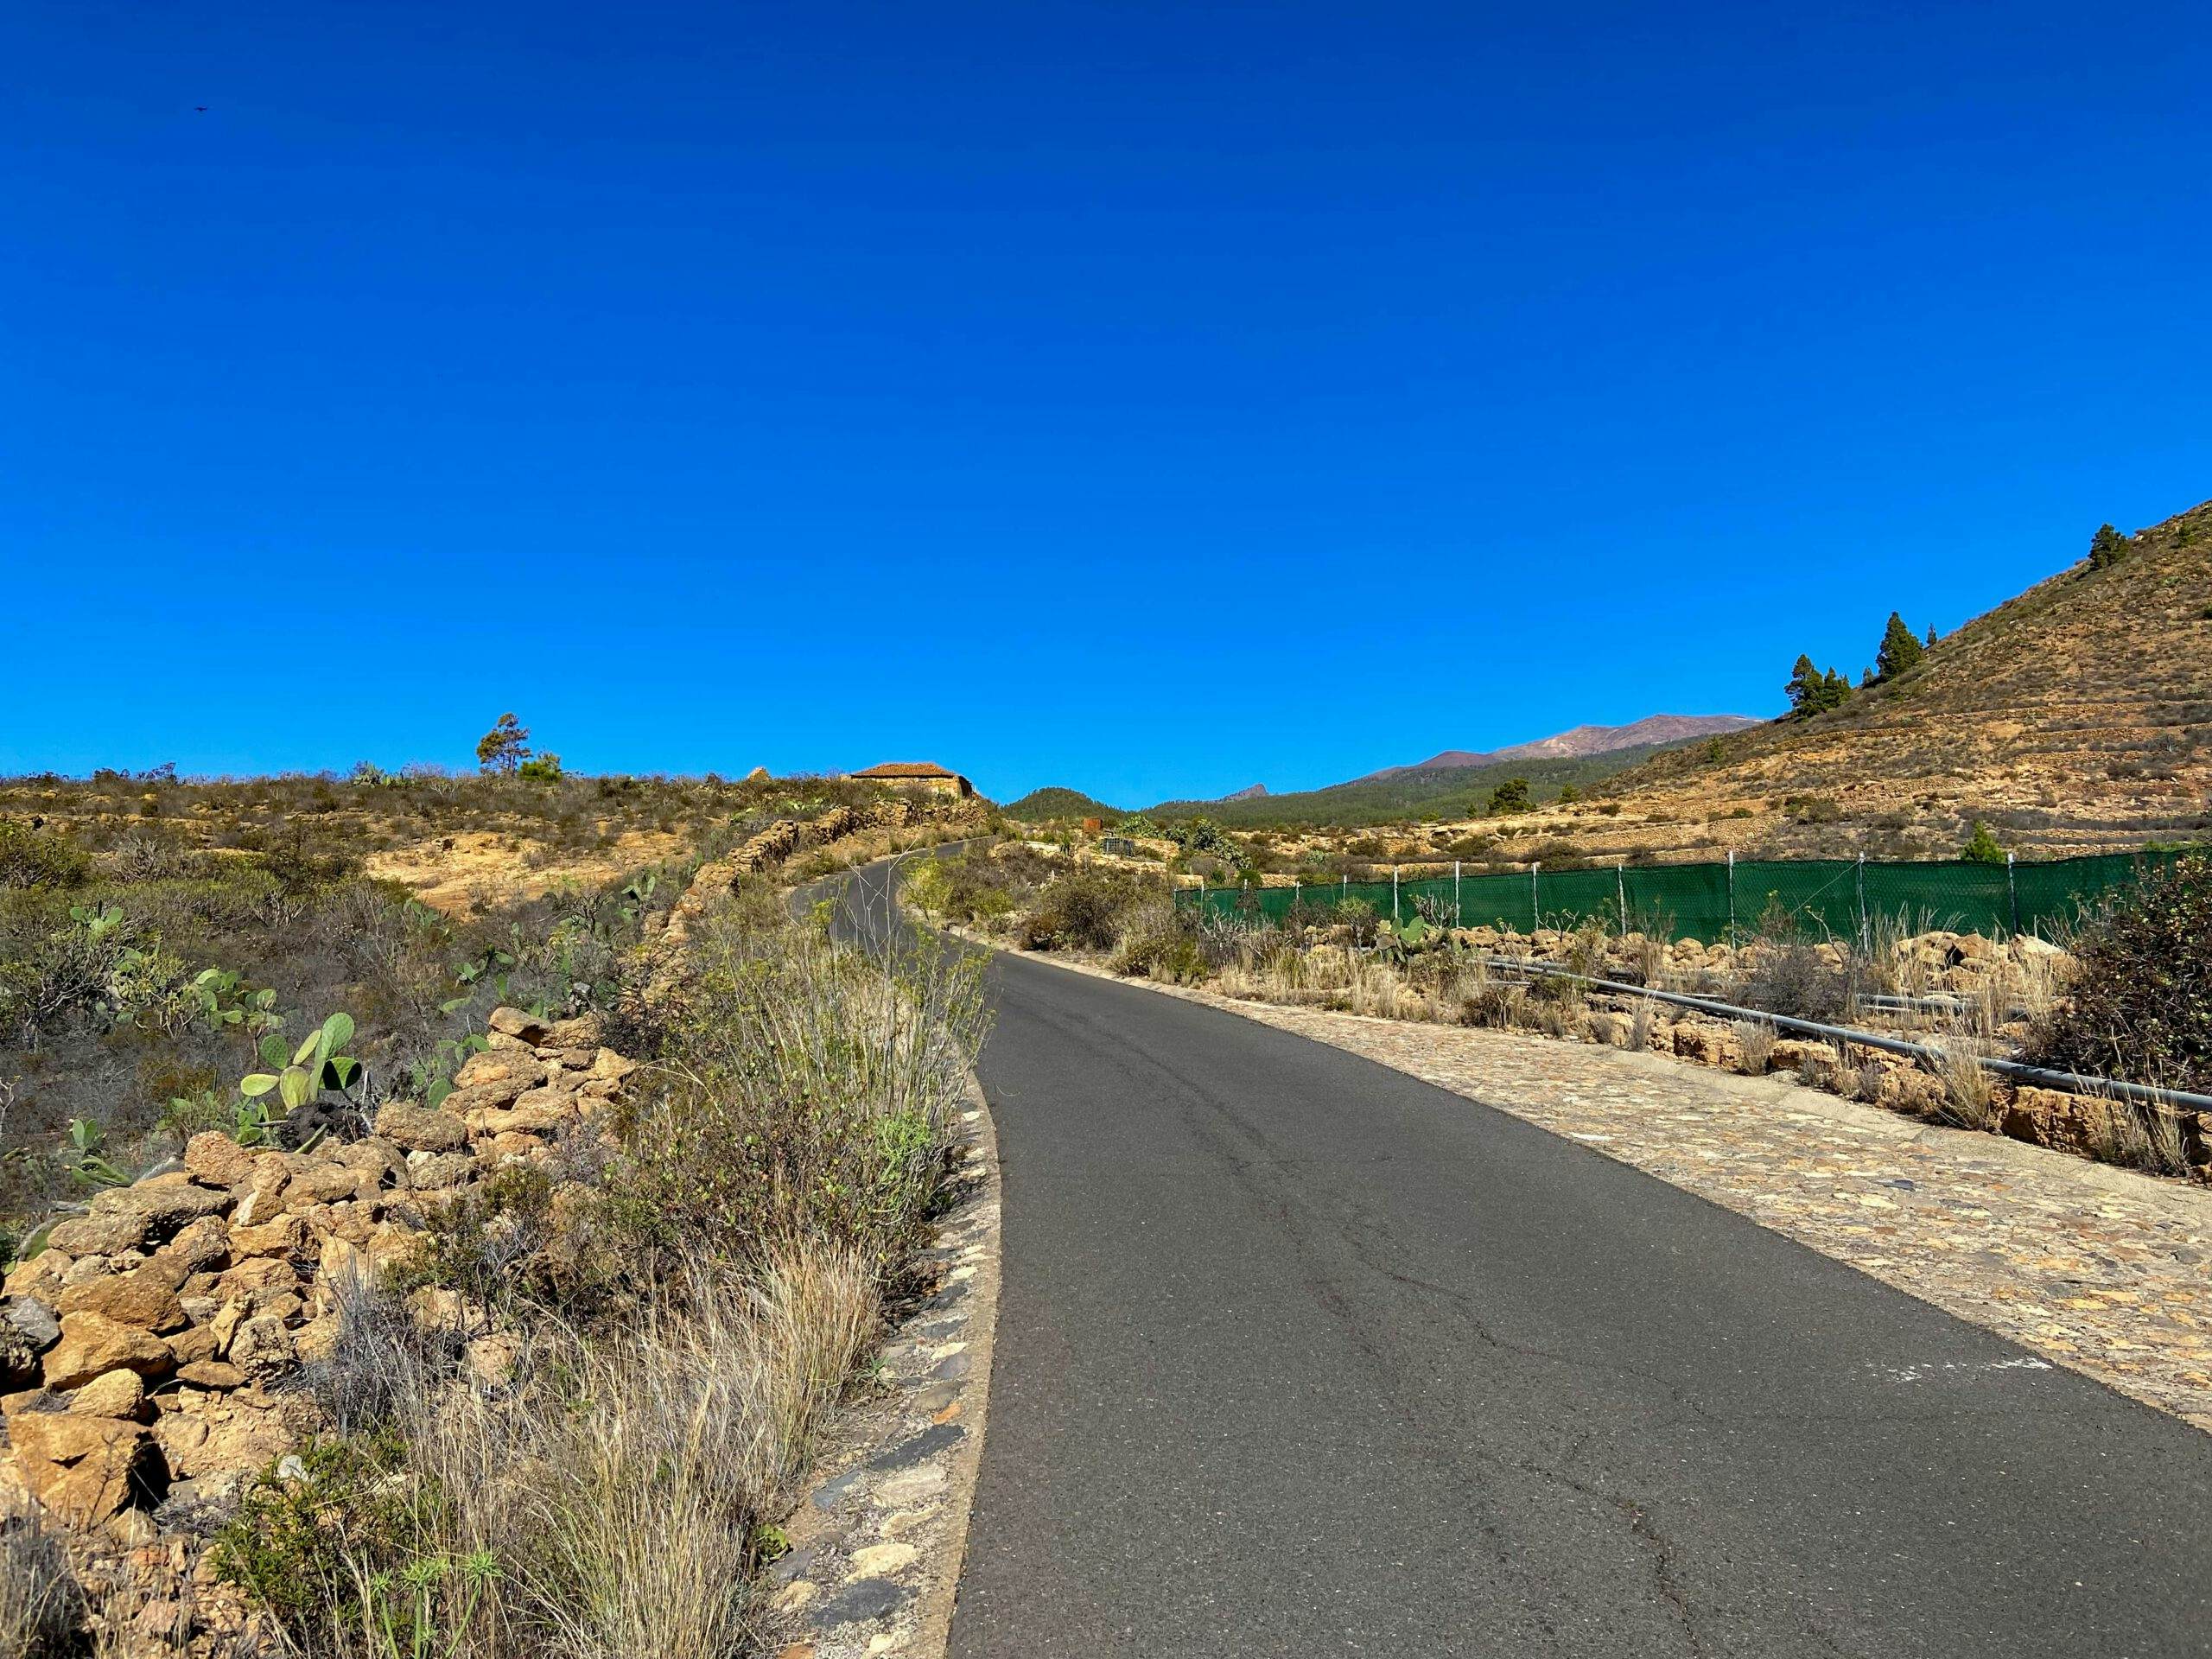 Road on the right side of the Barranco - part of the hiking trail